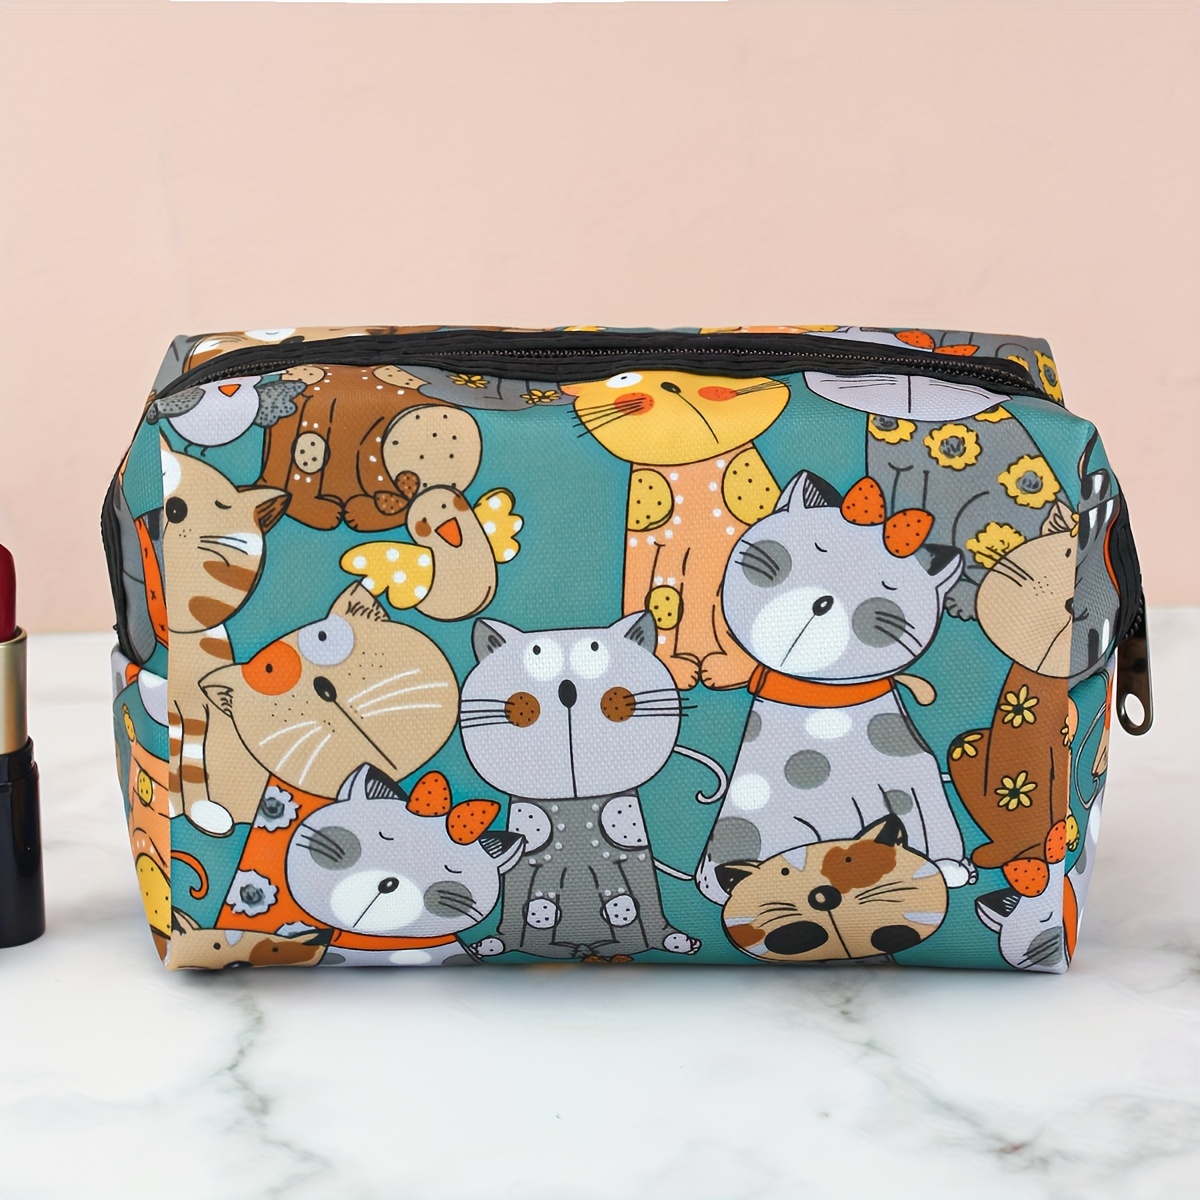 

Octagonal Bag, Cute Cat Print Storage Bag, Cosmetic Purse, Large Capacity Makeup Zipper Bag: Perfect For On-the-go Beauty!